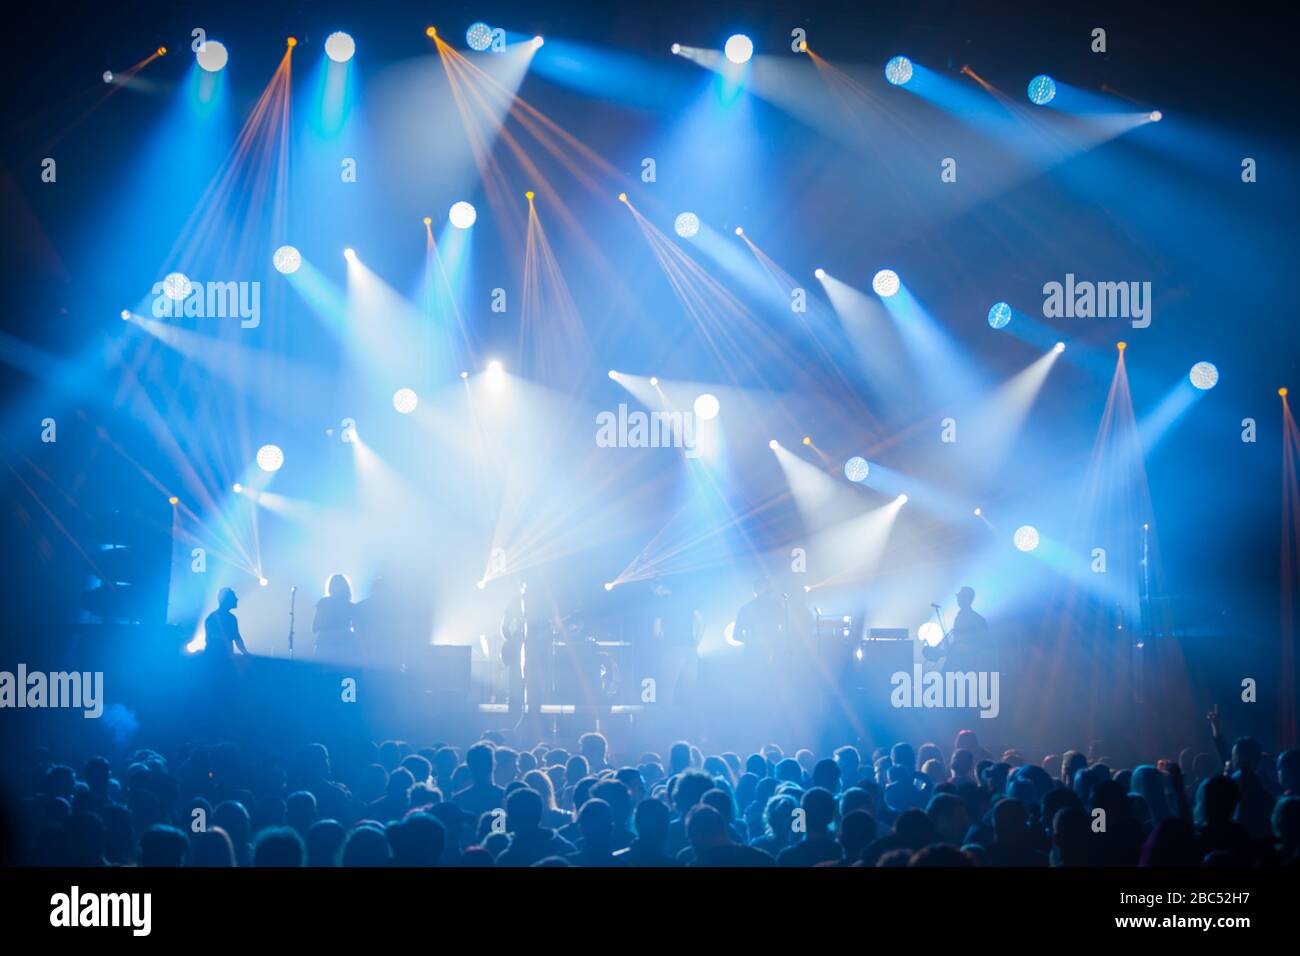 Stage lights on concert. Lighting equipment with multi-colored beams. Silhouettes of people and musicians in big concert stage. Stock Photo